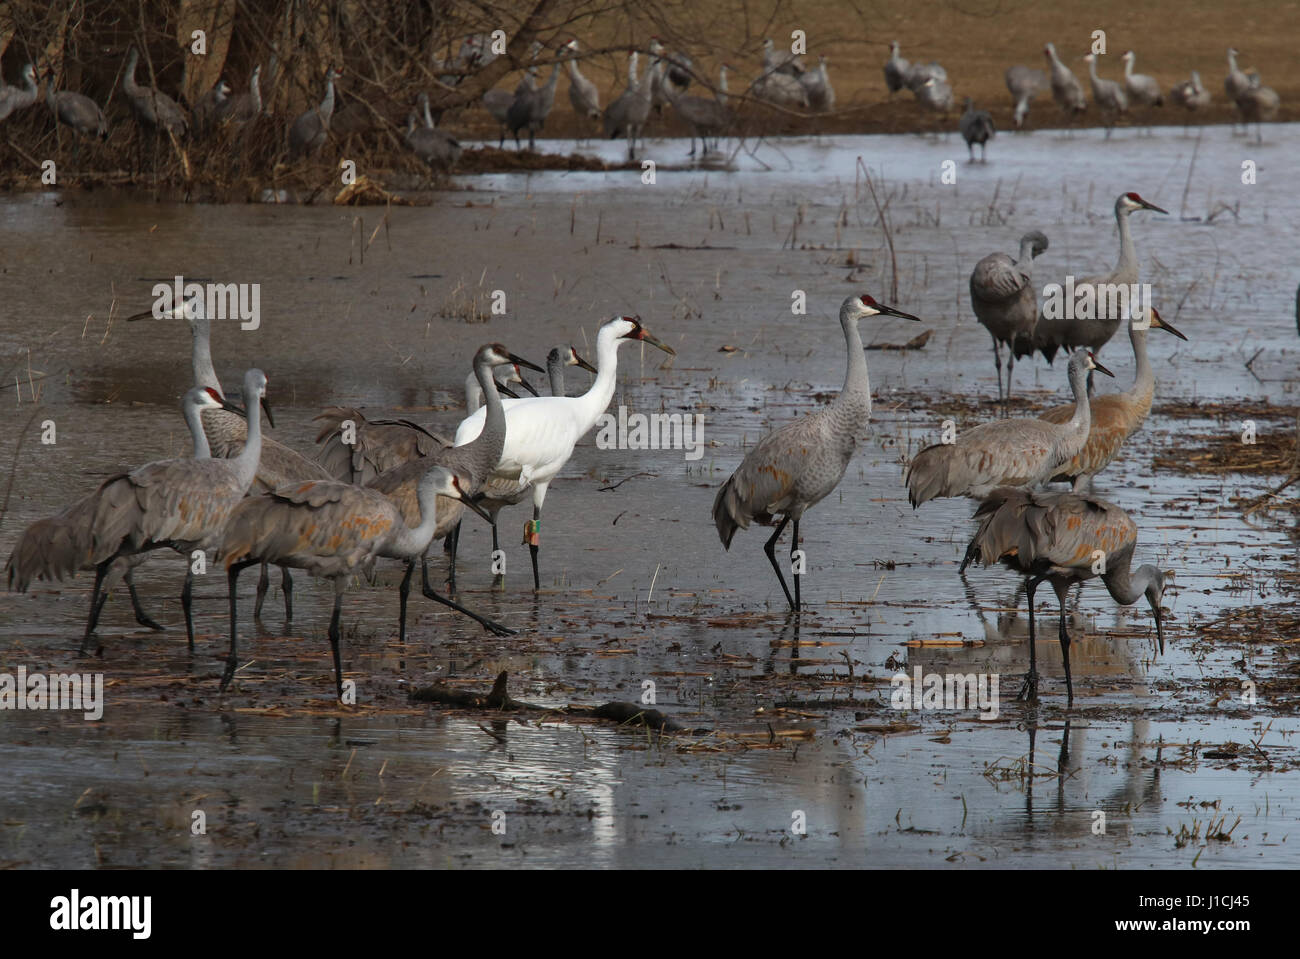 Whooping crane with sandhill cranes in Indiana wetland Stock Photo